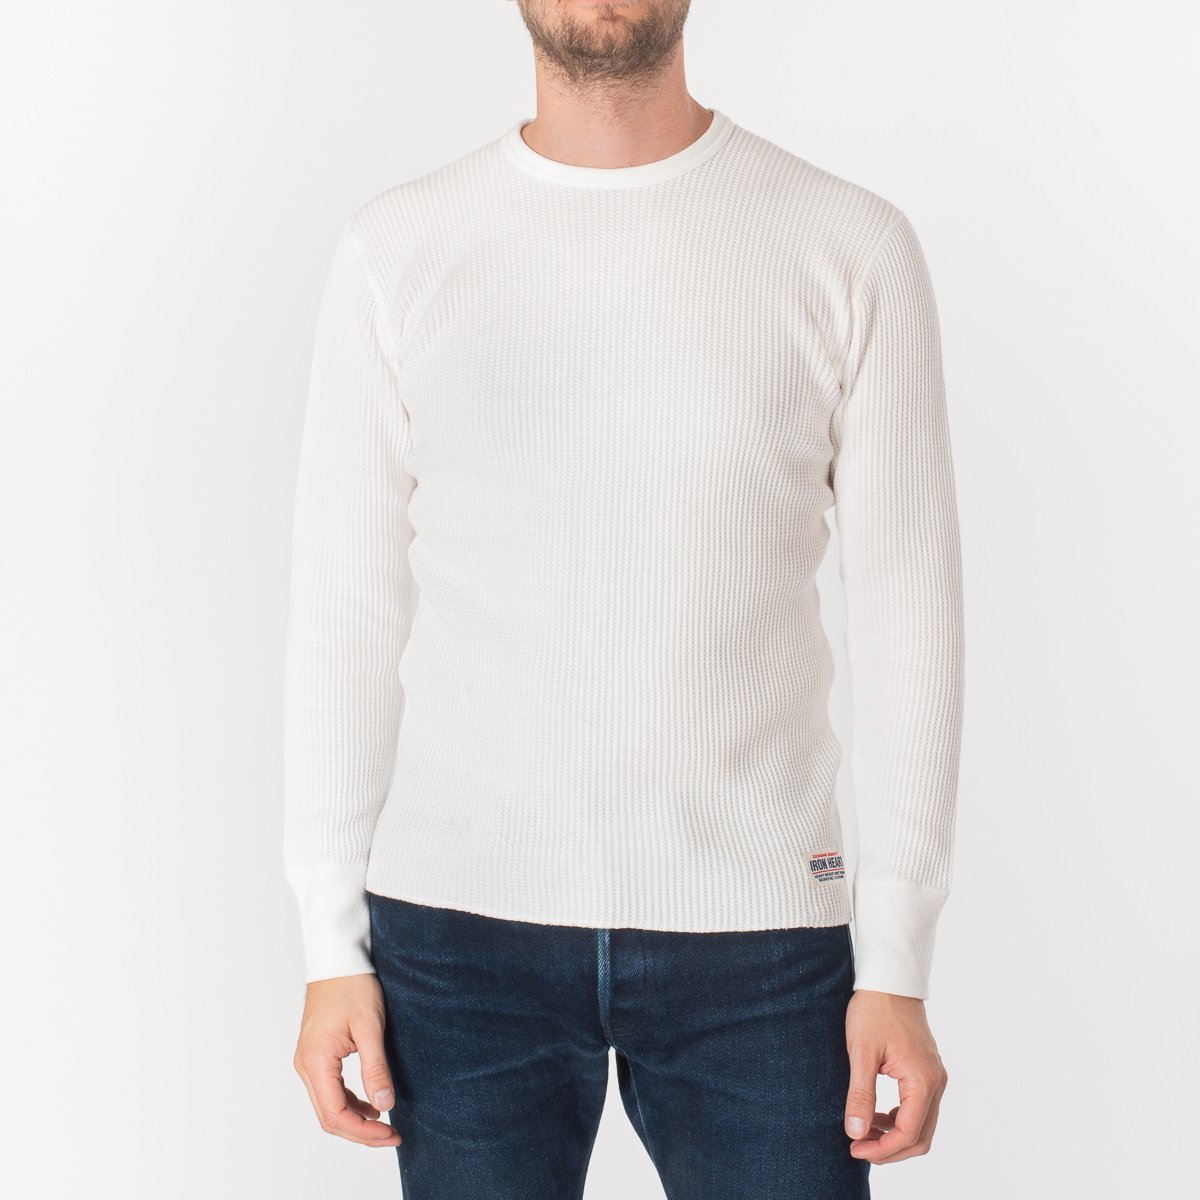 Thermal Crew Neck Long Sleeved Top - White